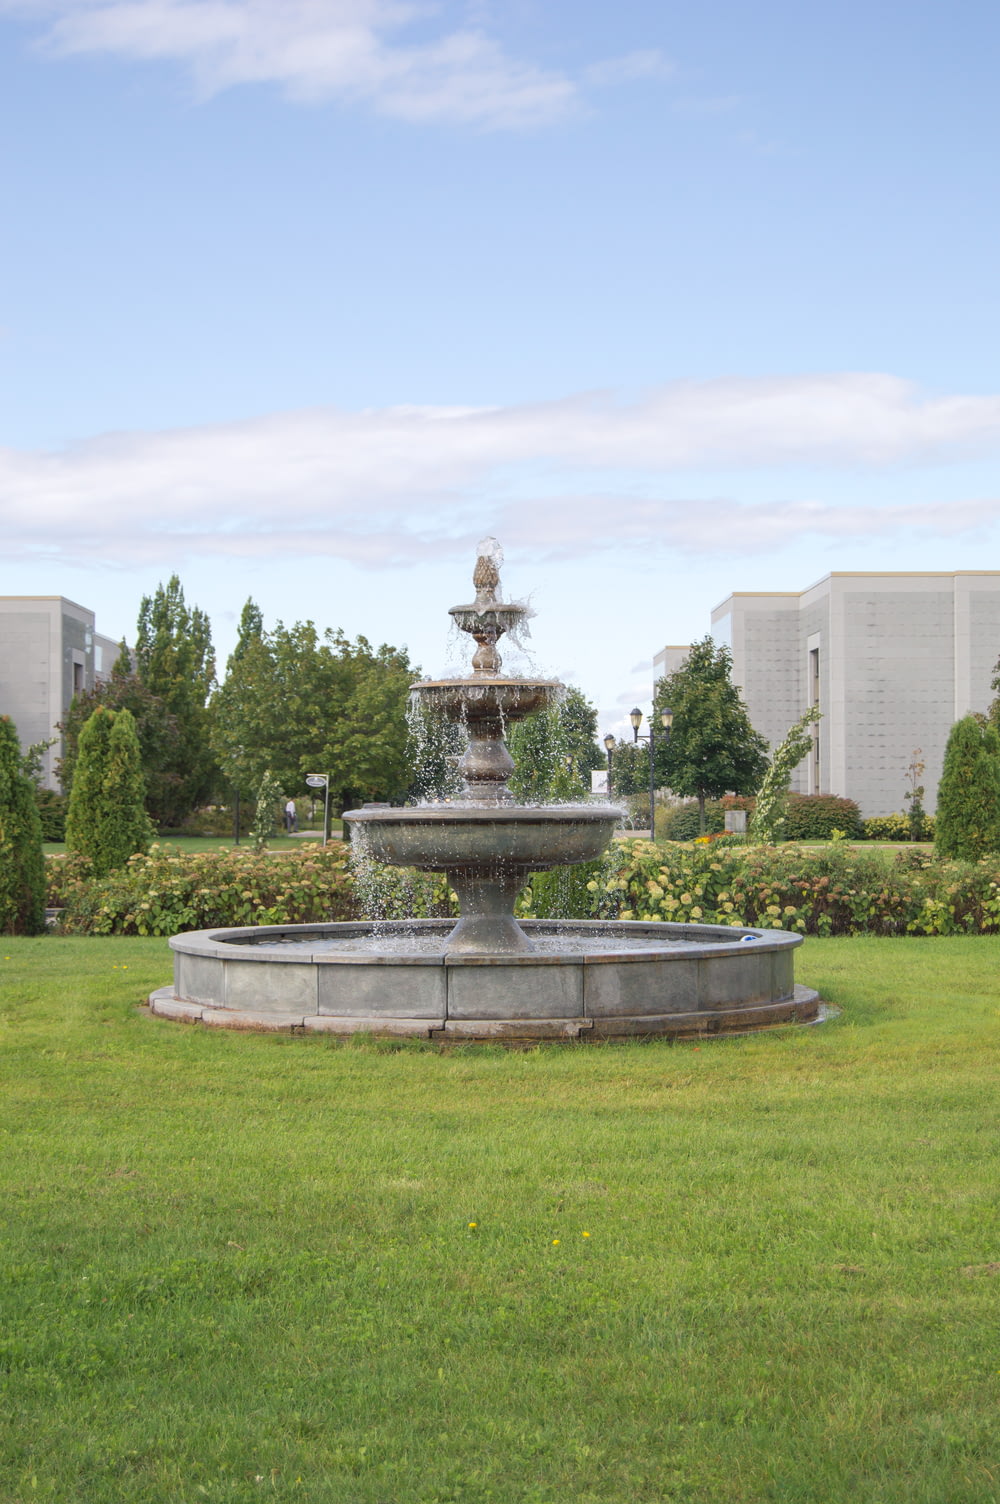 a fountain in the middle of a grassy field